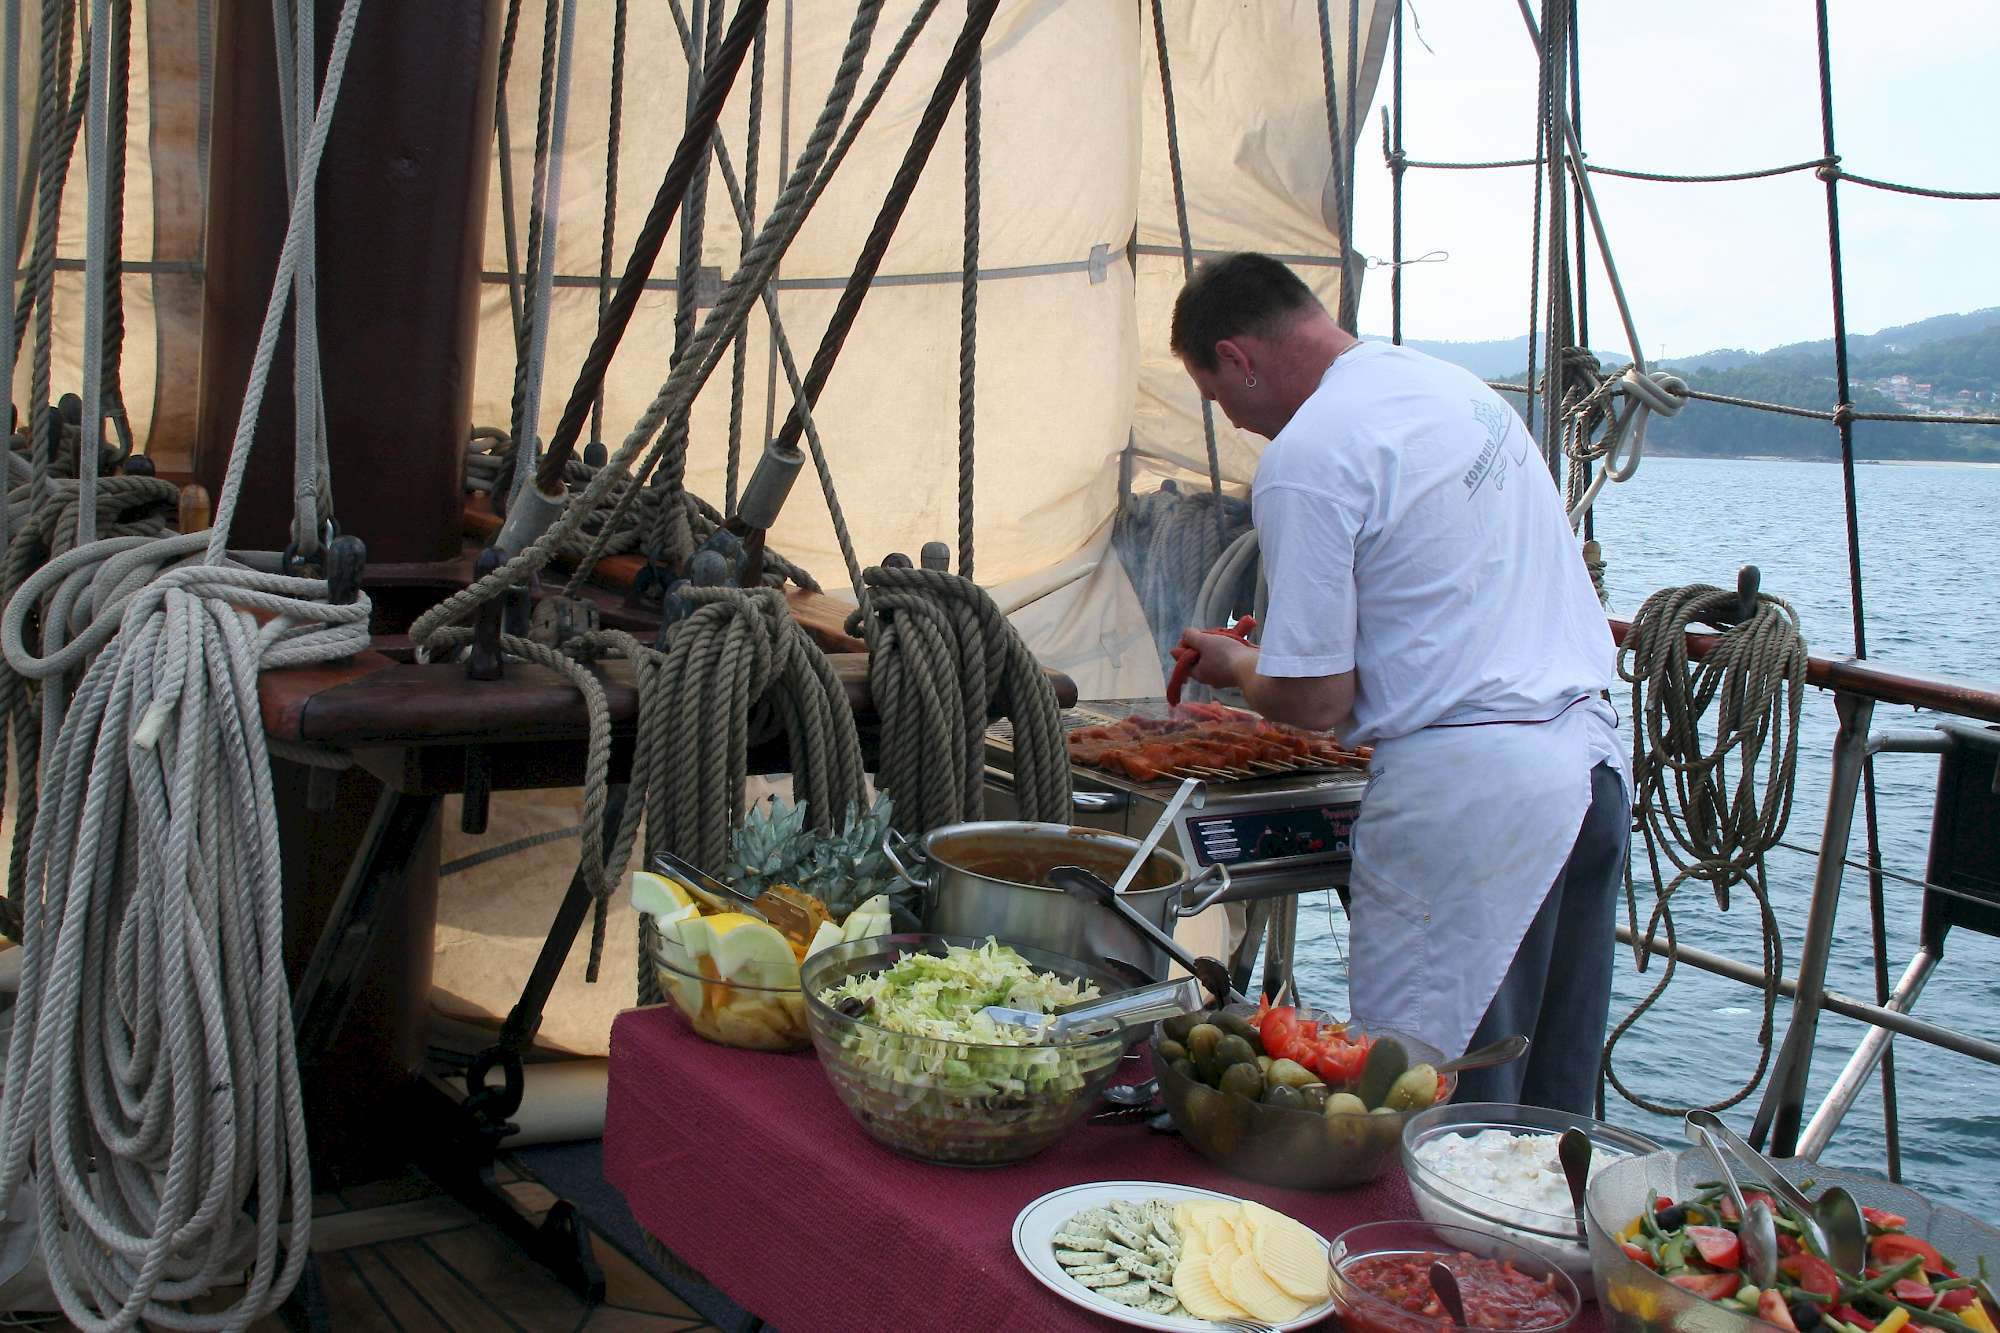 Chef grilling on the deck of the Flying Dutchman